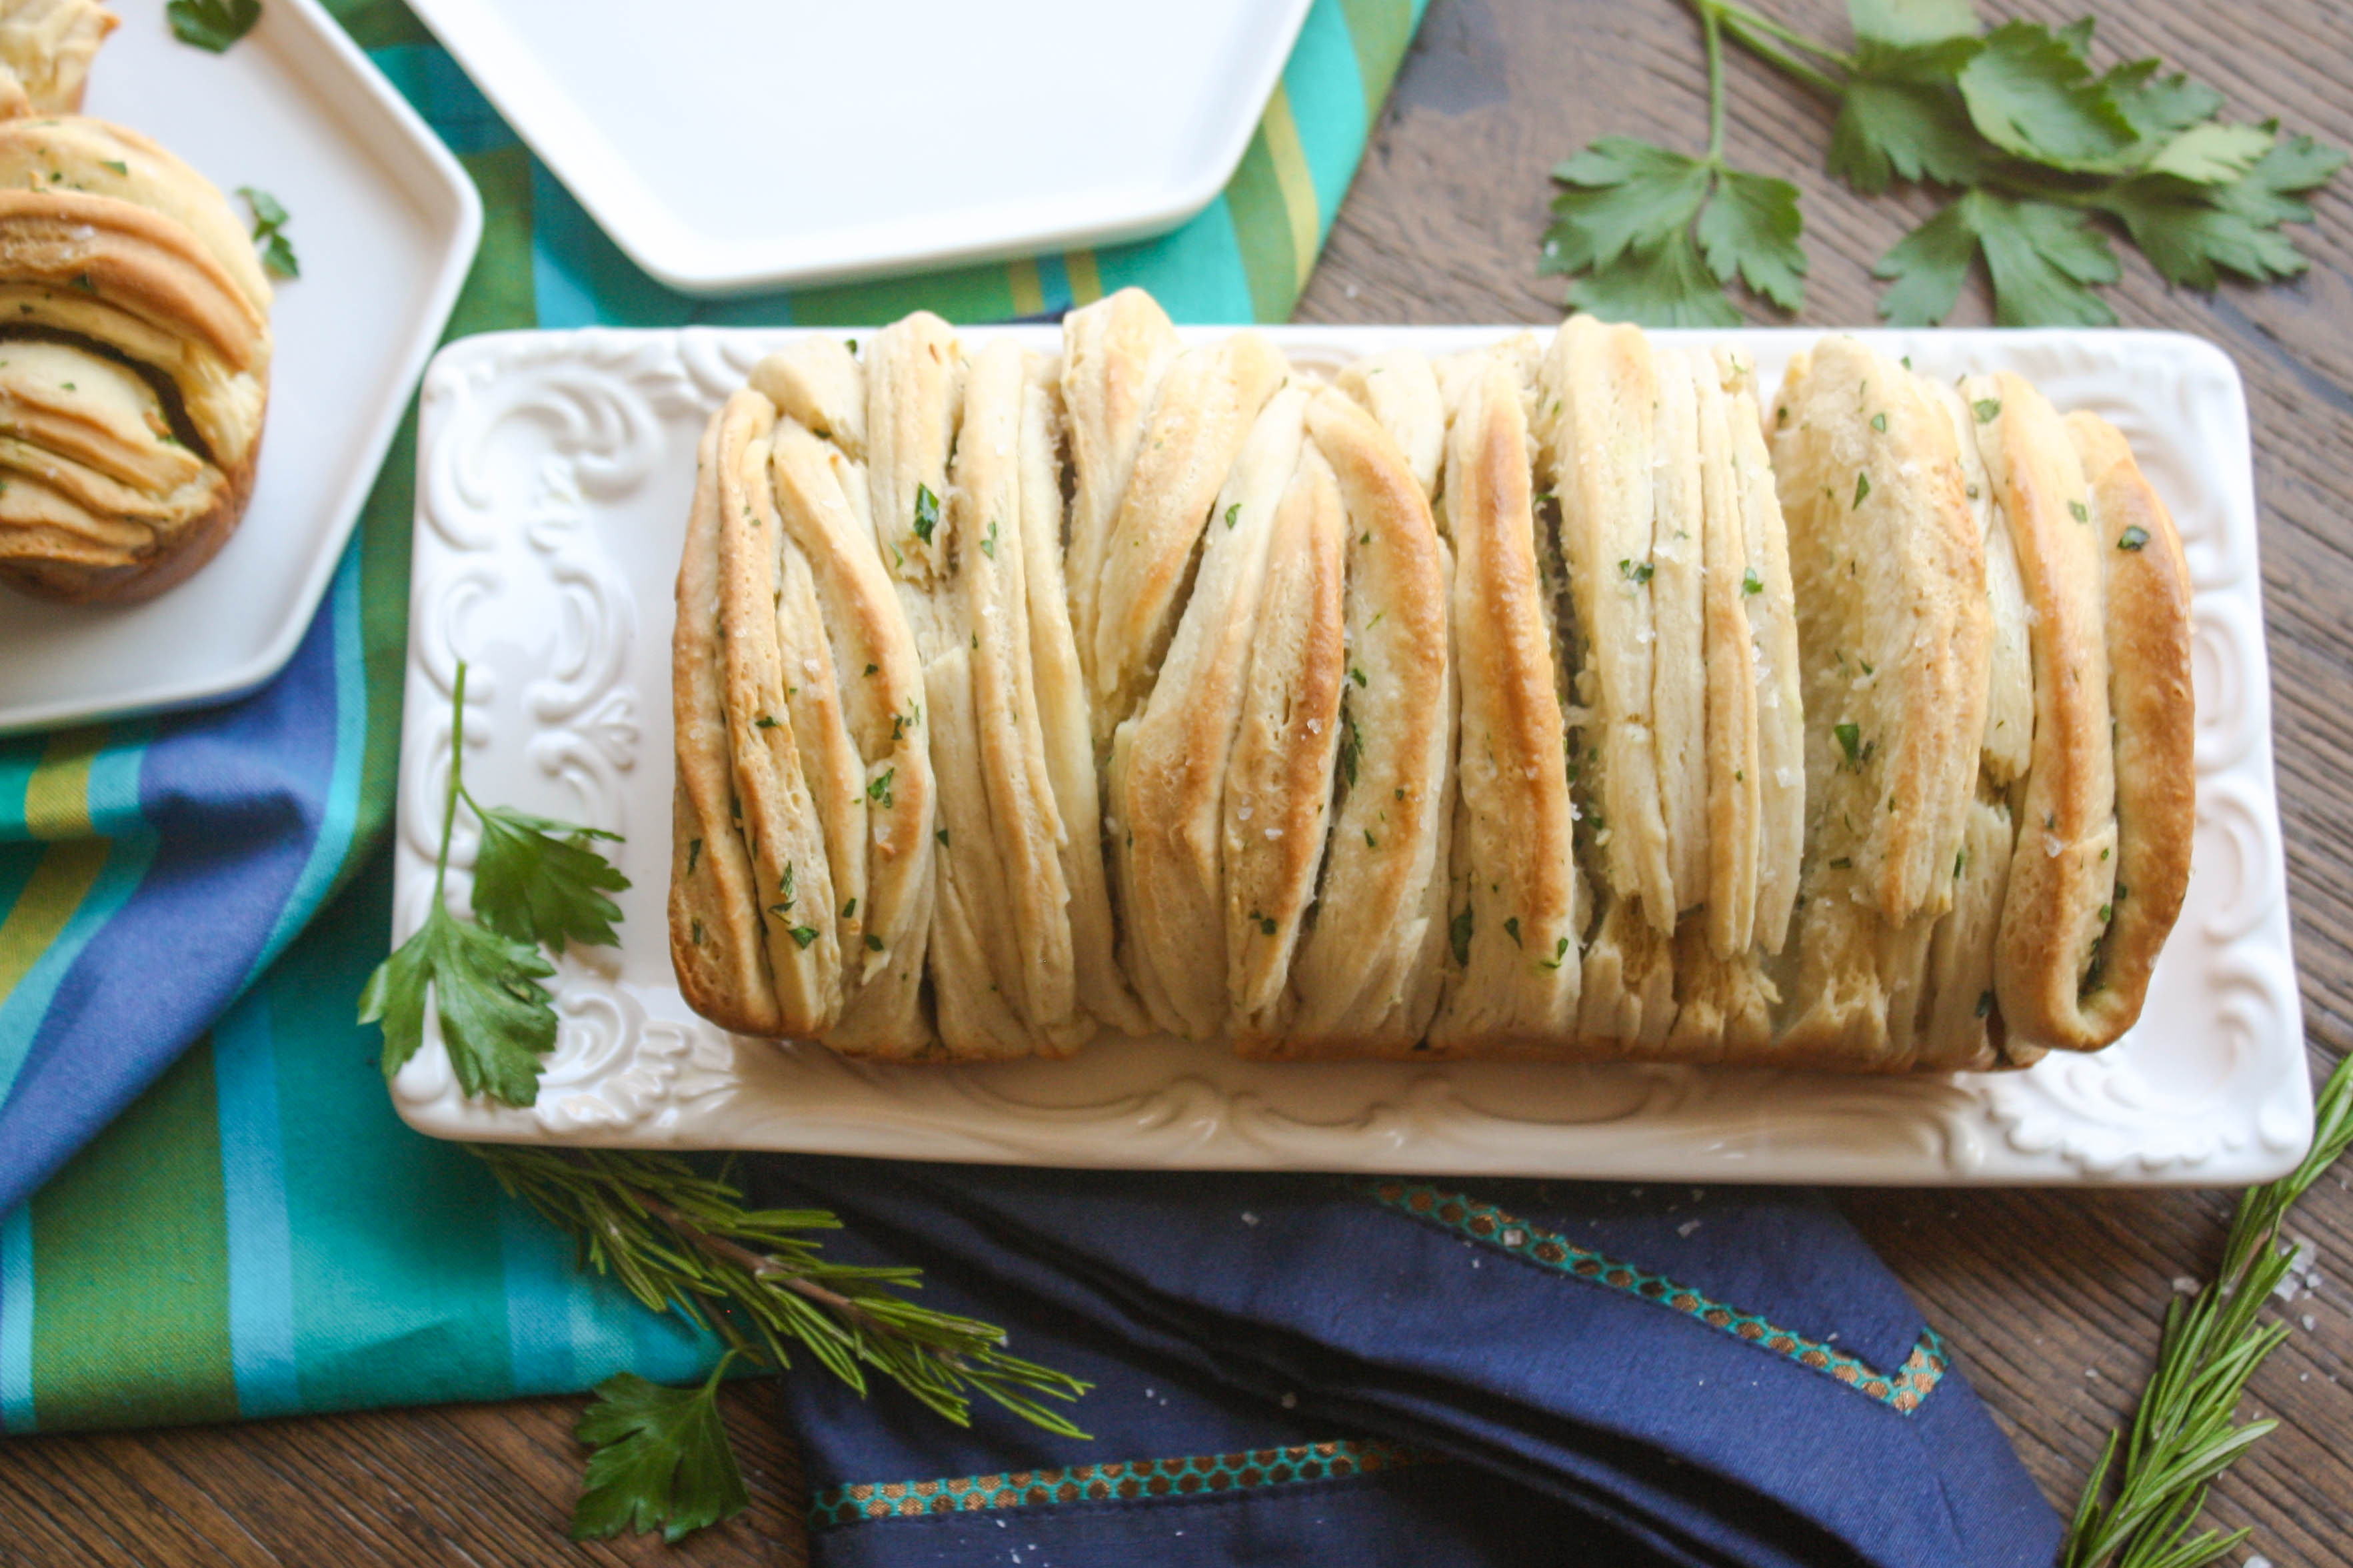 Garlic & Herb Pull Apart Bread is a treat at any time. It's a pretty loaf that's fun to serve.